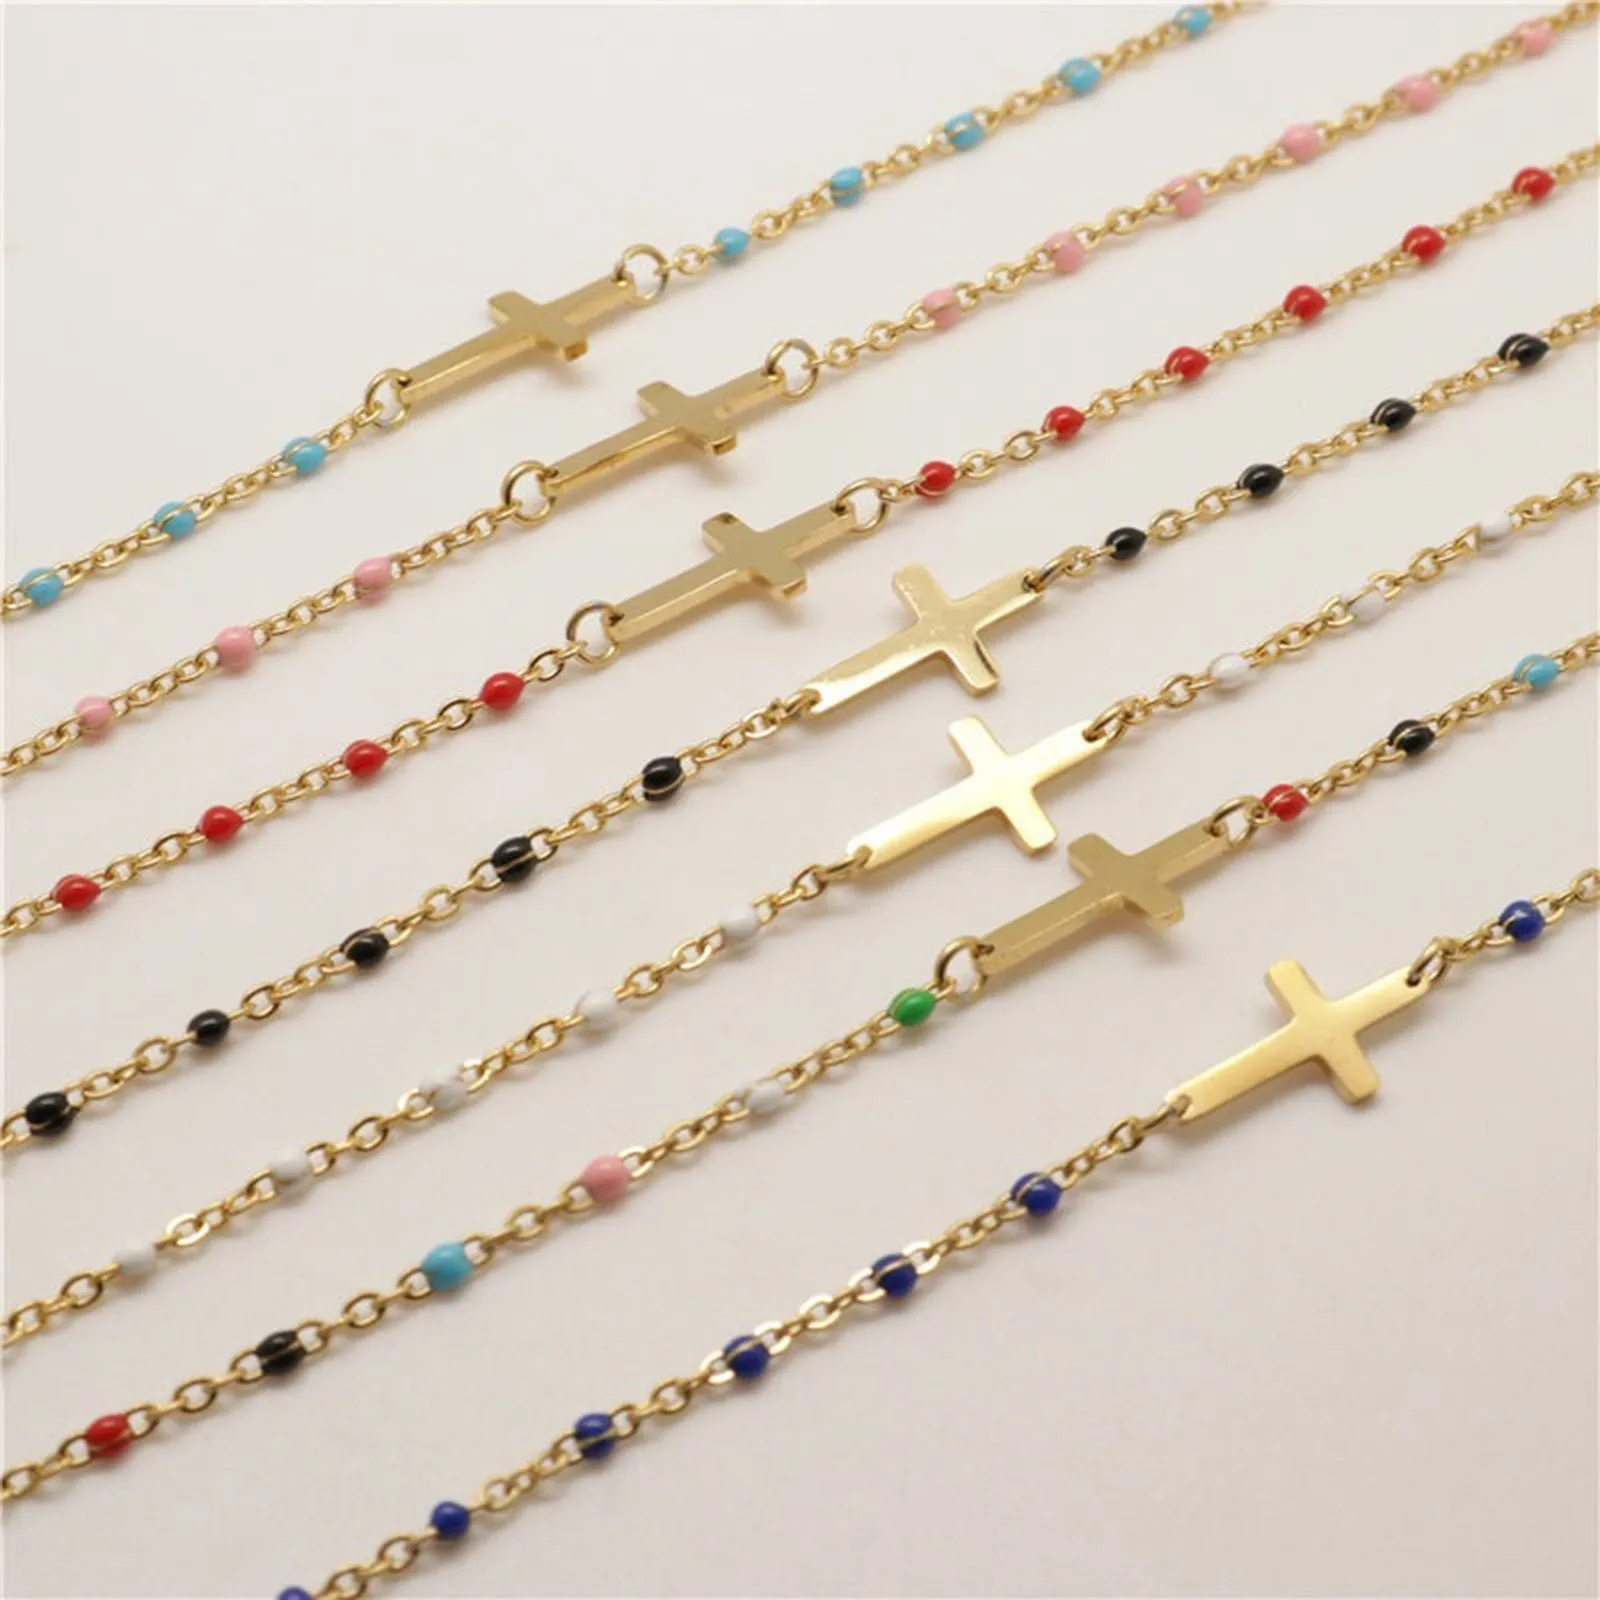 

1PC 18cm Stainless Steel Religious Cross Charms Bracelets Gold Color Link Chain Bracelet For Women Party Club Jewelry Trend Gift